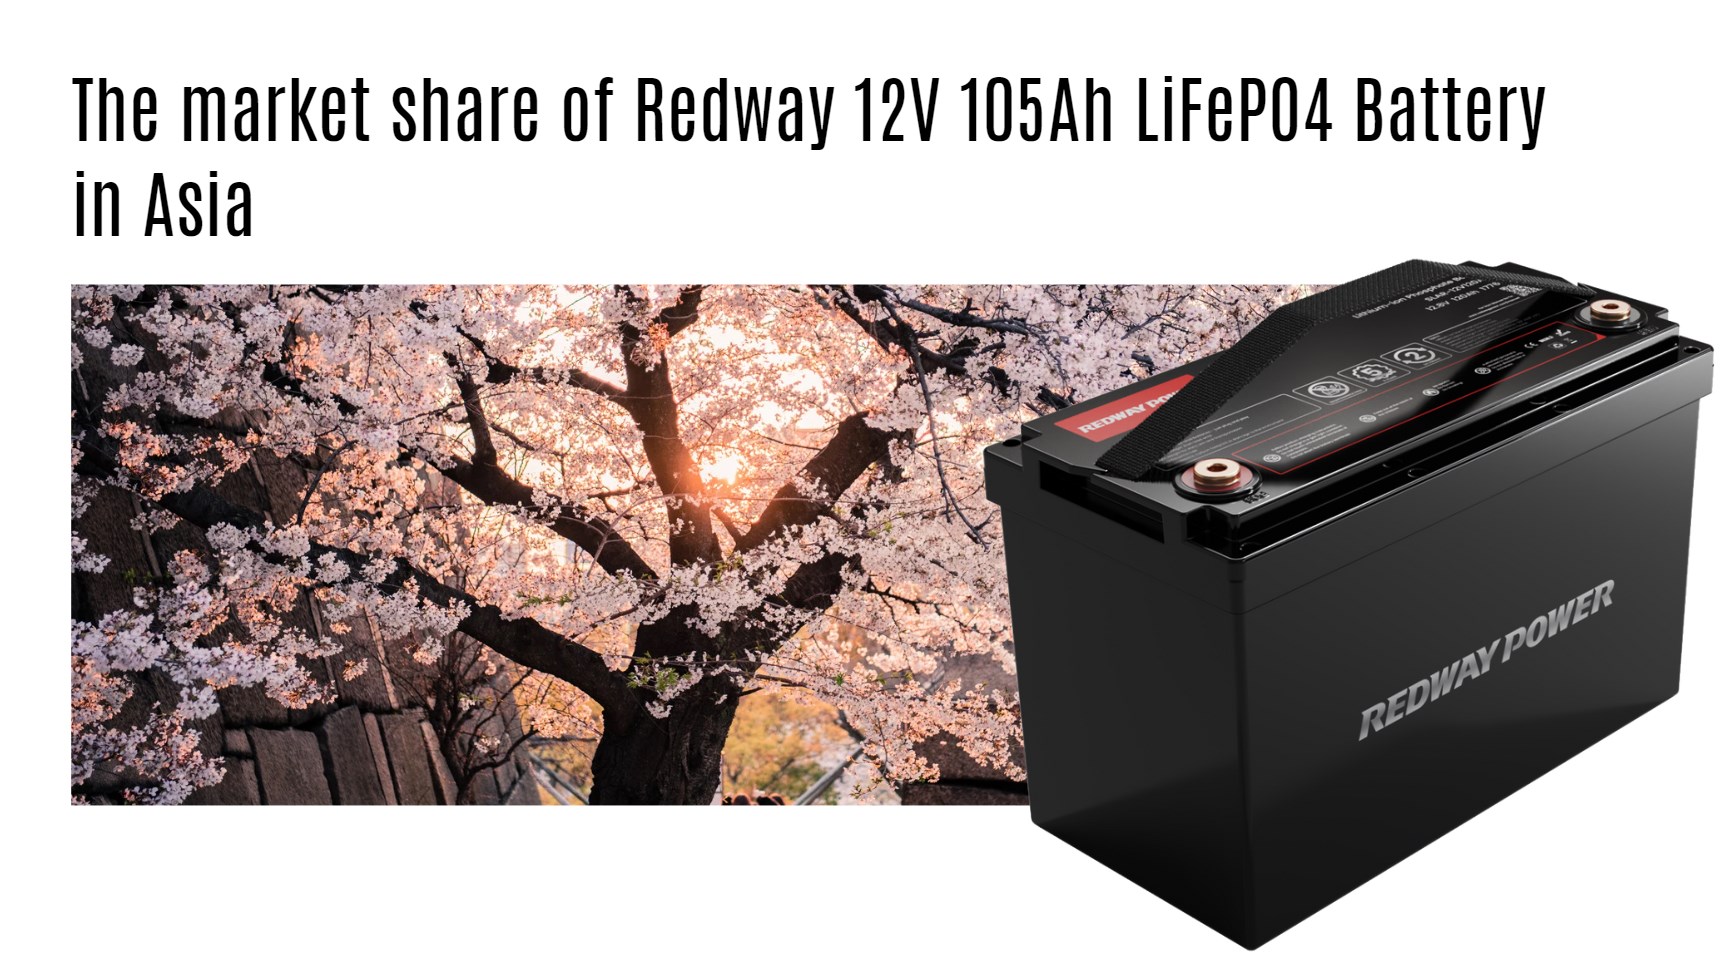 The market share of Redway 12V 105Ah LiFePO4 Battery in Asia